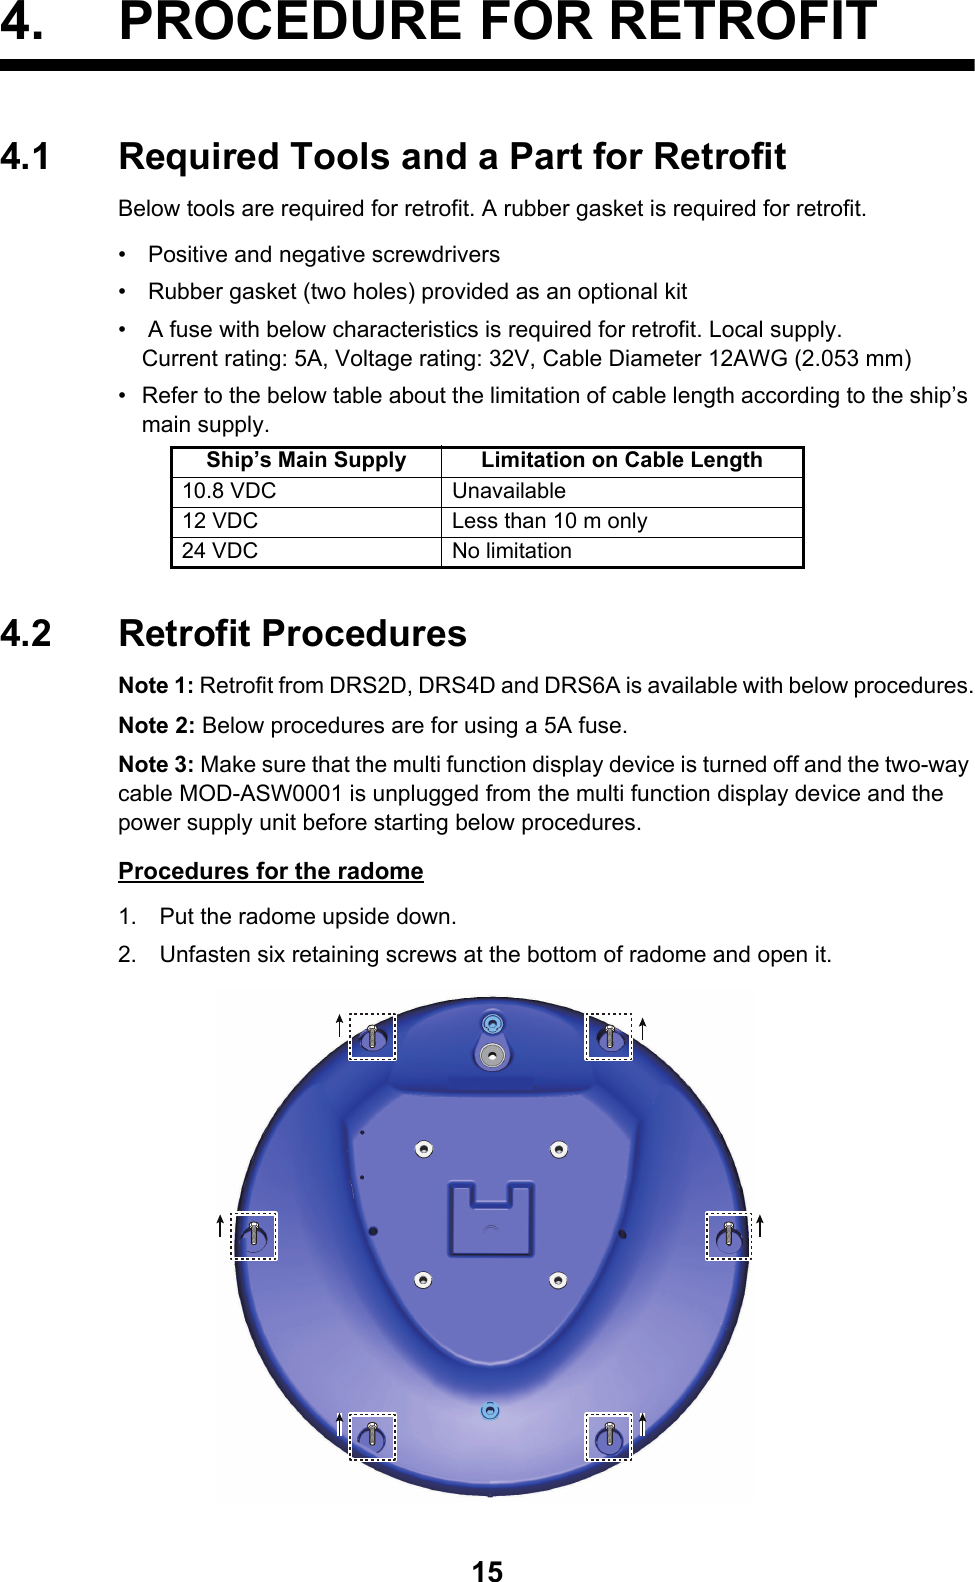 154. PROCEDURE FOR RETROFIT4.1 Required Tools and a Part for RetrofitBelow tools are required for retrofit. A rubber gasket is required for retrofit.•   Positive and negative screwdrivers•   Rubber gasket (two holes) provided as an optional kit•   A fuse with below characteristics is required for retrofit. Local supply.Current rating: 5A, Voltage rating: 32V, Cable Diameter 12AWG (2.053 mm)•  Refer to the below table about the limitation of cable length according to the ship’s main supply.4.2 Retrofit ProceduresNote 1: Retrofit from DRS2D, DRS4D and DRS6A is available with below procedures.Note 2: Below procedures are for using a 5A fuse.Note 3: Make sure that the multi function display device is turned off and the two-way cable MOD-ASW0001 is unplugged from the multi function display device and the power supply unit before starting below procedures.Procedures for the radome1. Put the radome upside down.2. Unfasten six retaining screws at the bottom of radome and open it.Ship’s Main Supply Limitation on Cable Length10.8 VDC Unavailable12 VDC Less than 10 m only24 VDC No limitation